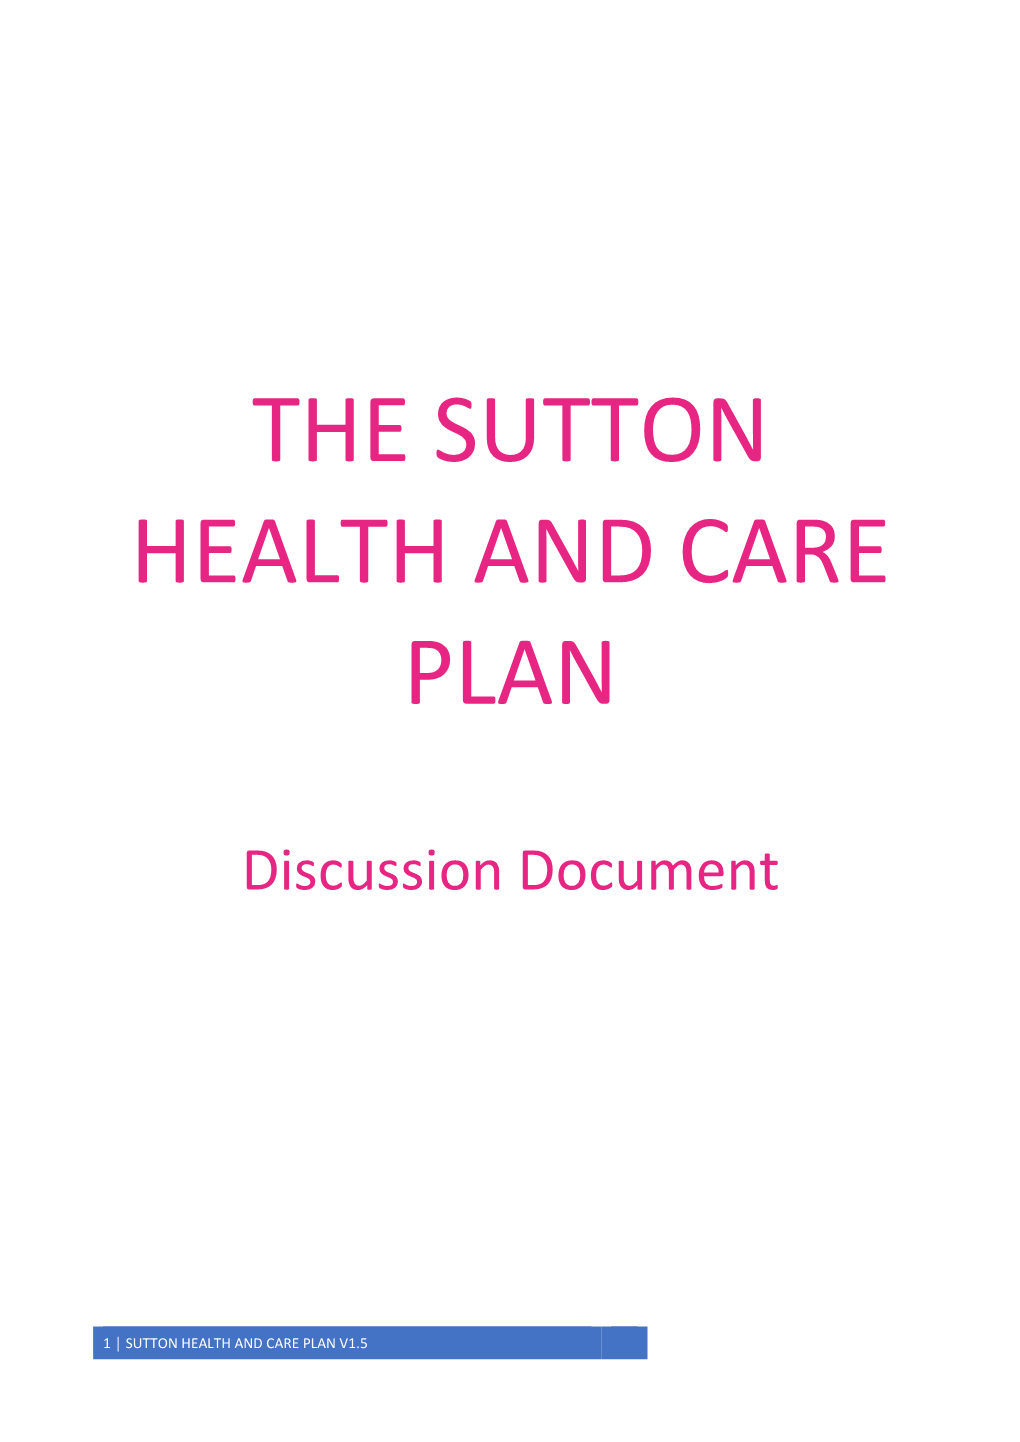 The Sutton Health and Care Plan